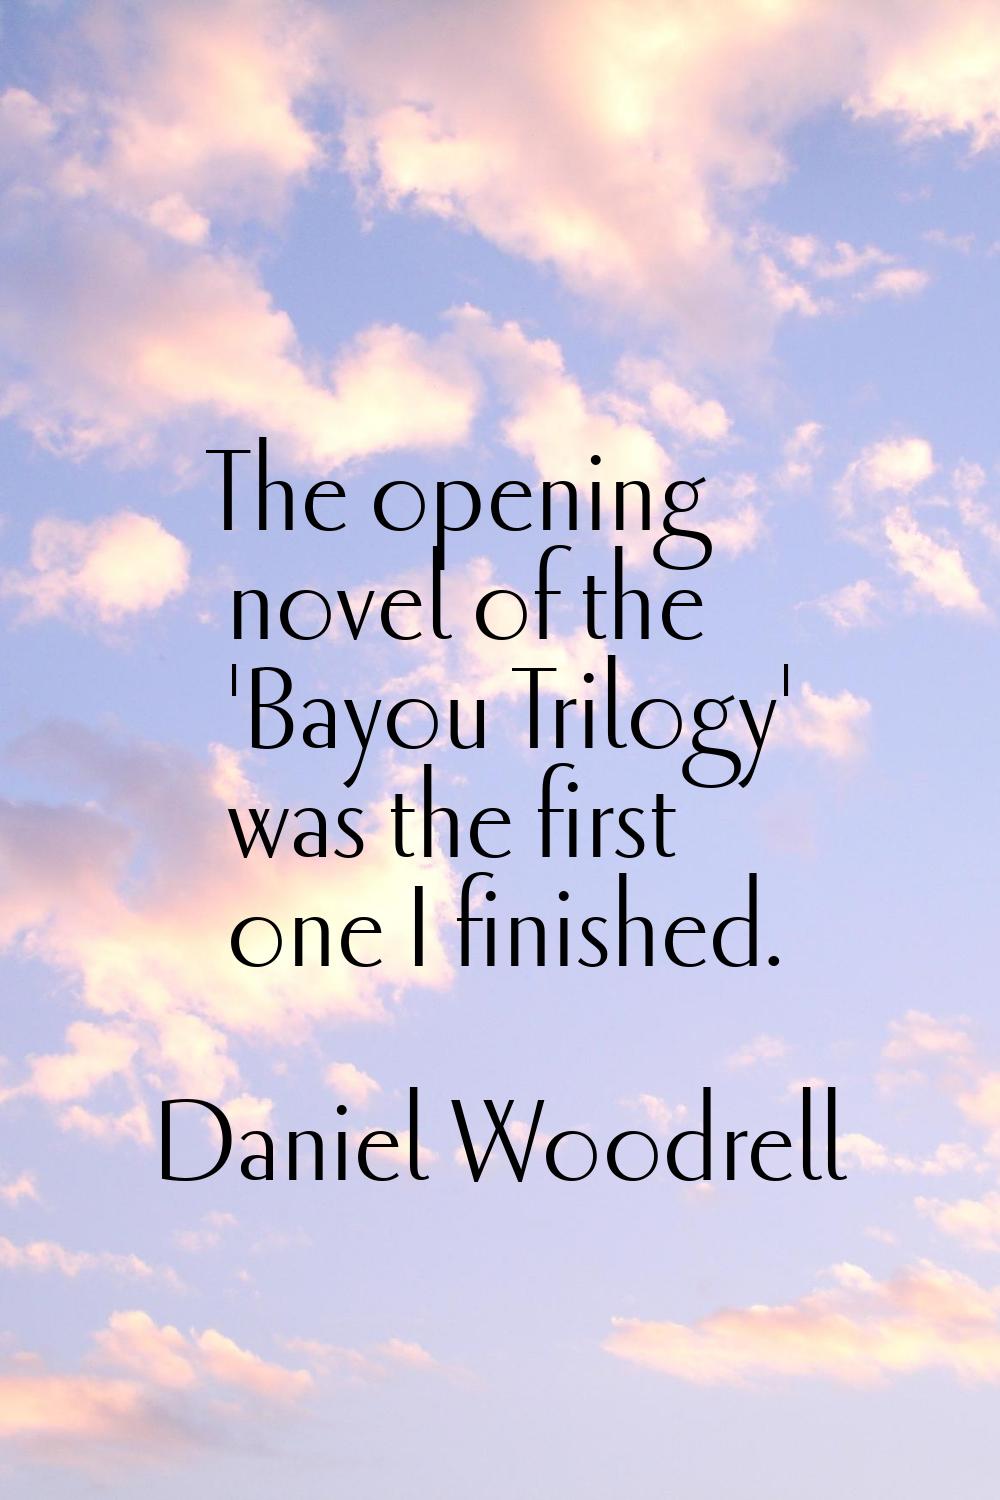 The opening novel of the 'Bayou Trilogy' was the first one I finished.